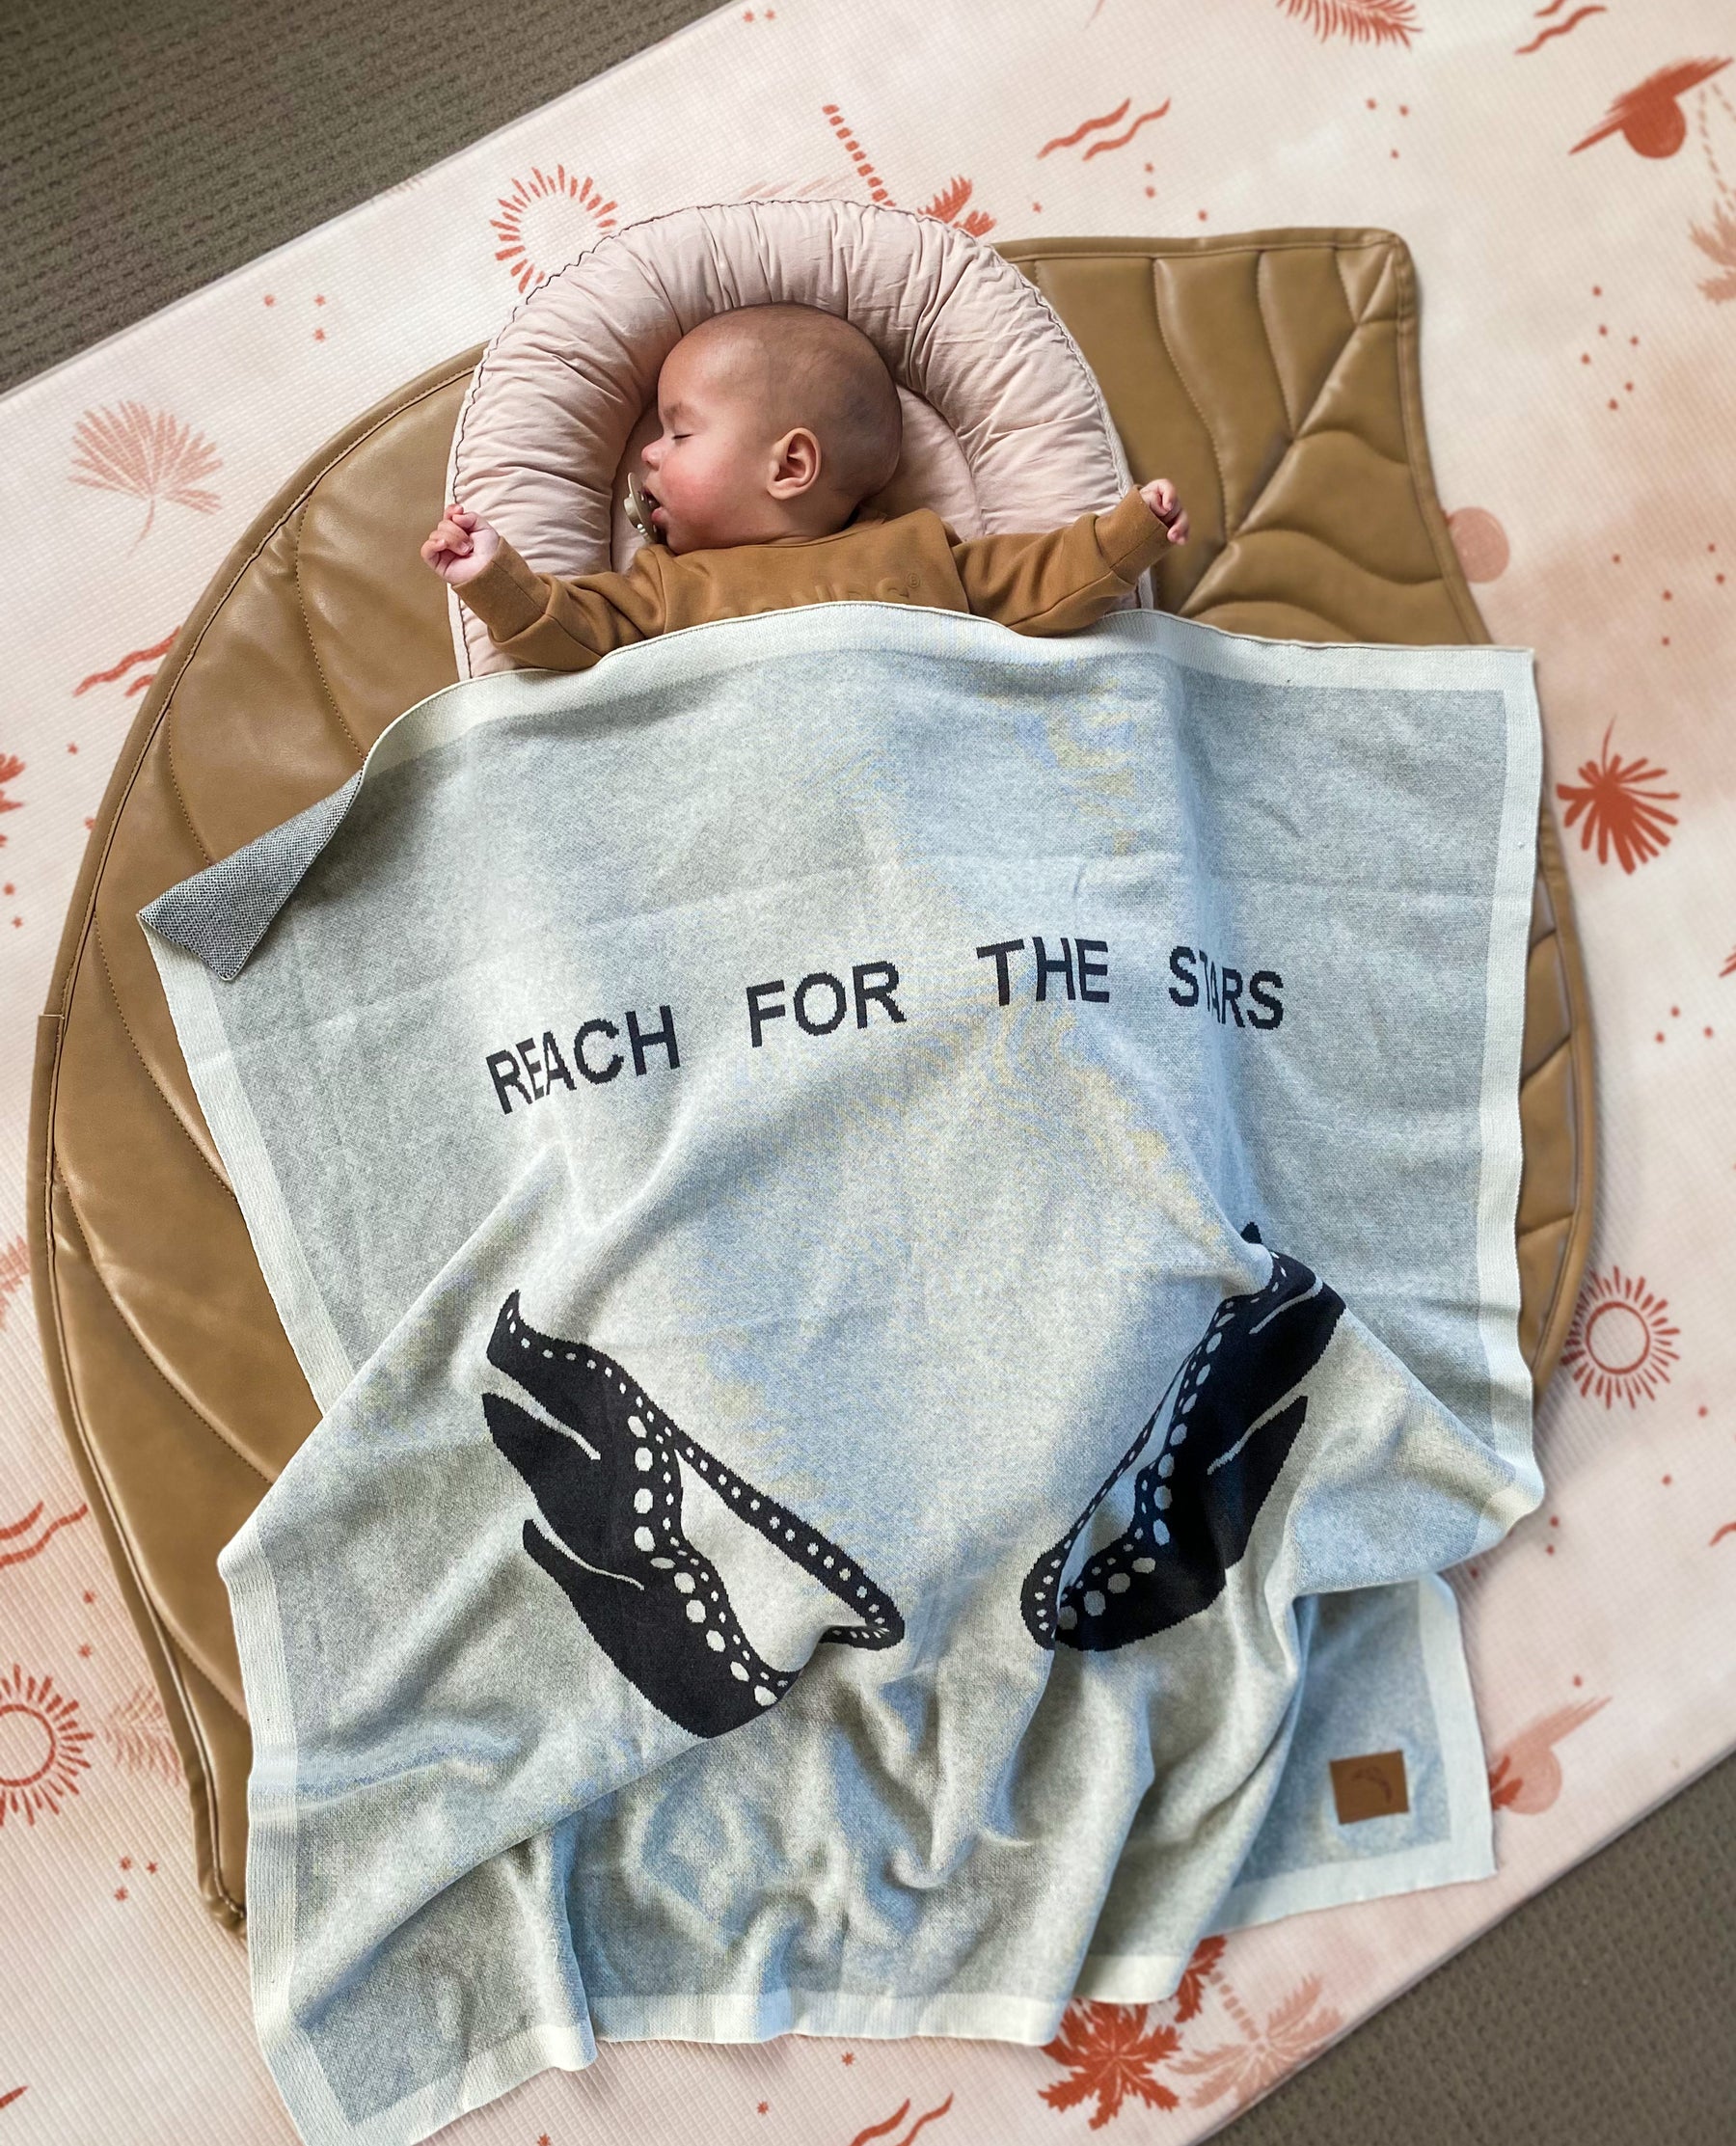 Organic Cot Blanket - Reach for the stars